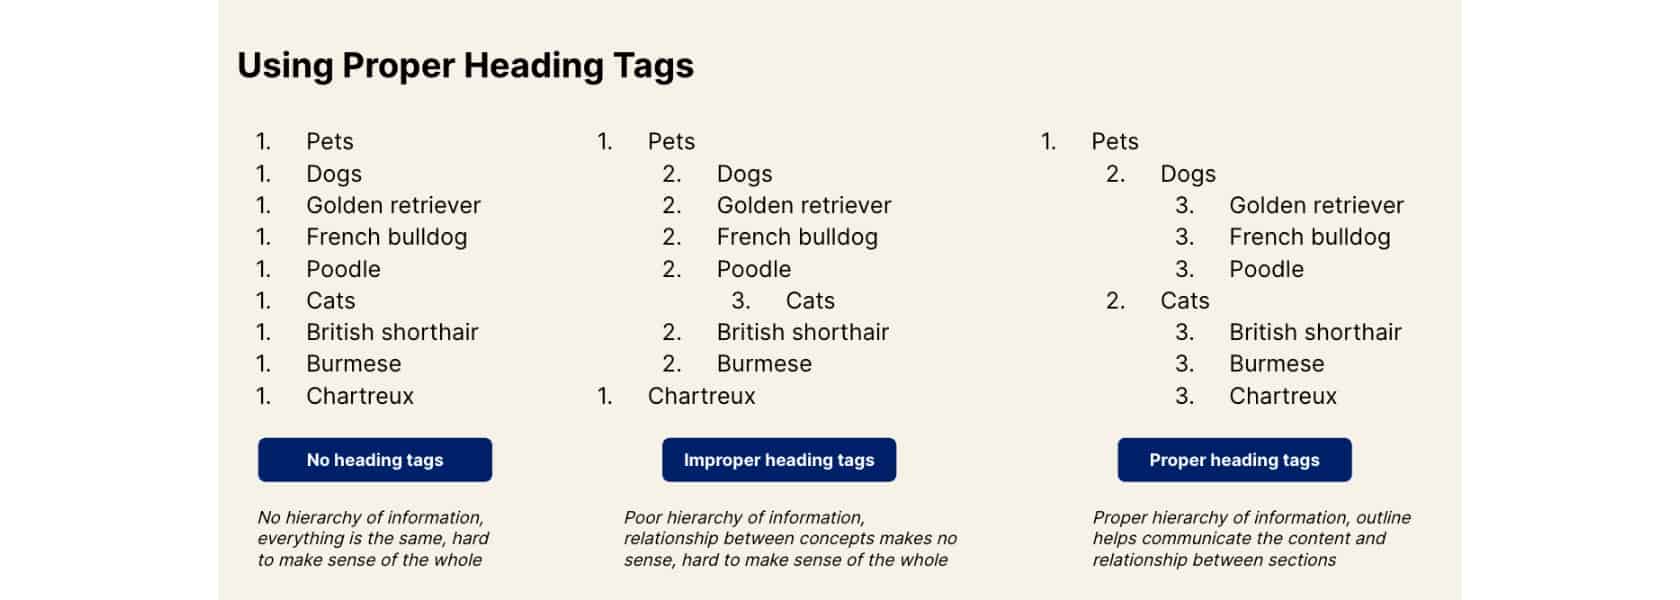 chart comparing the different ways of using heading tags